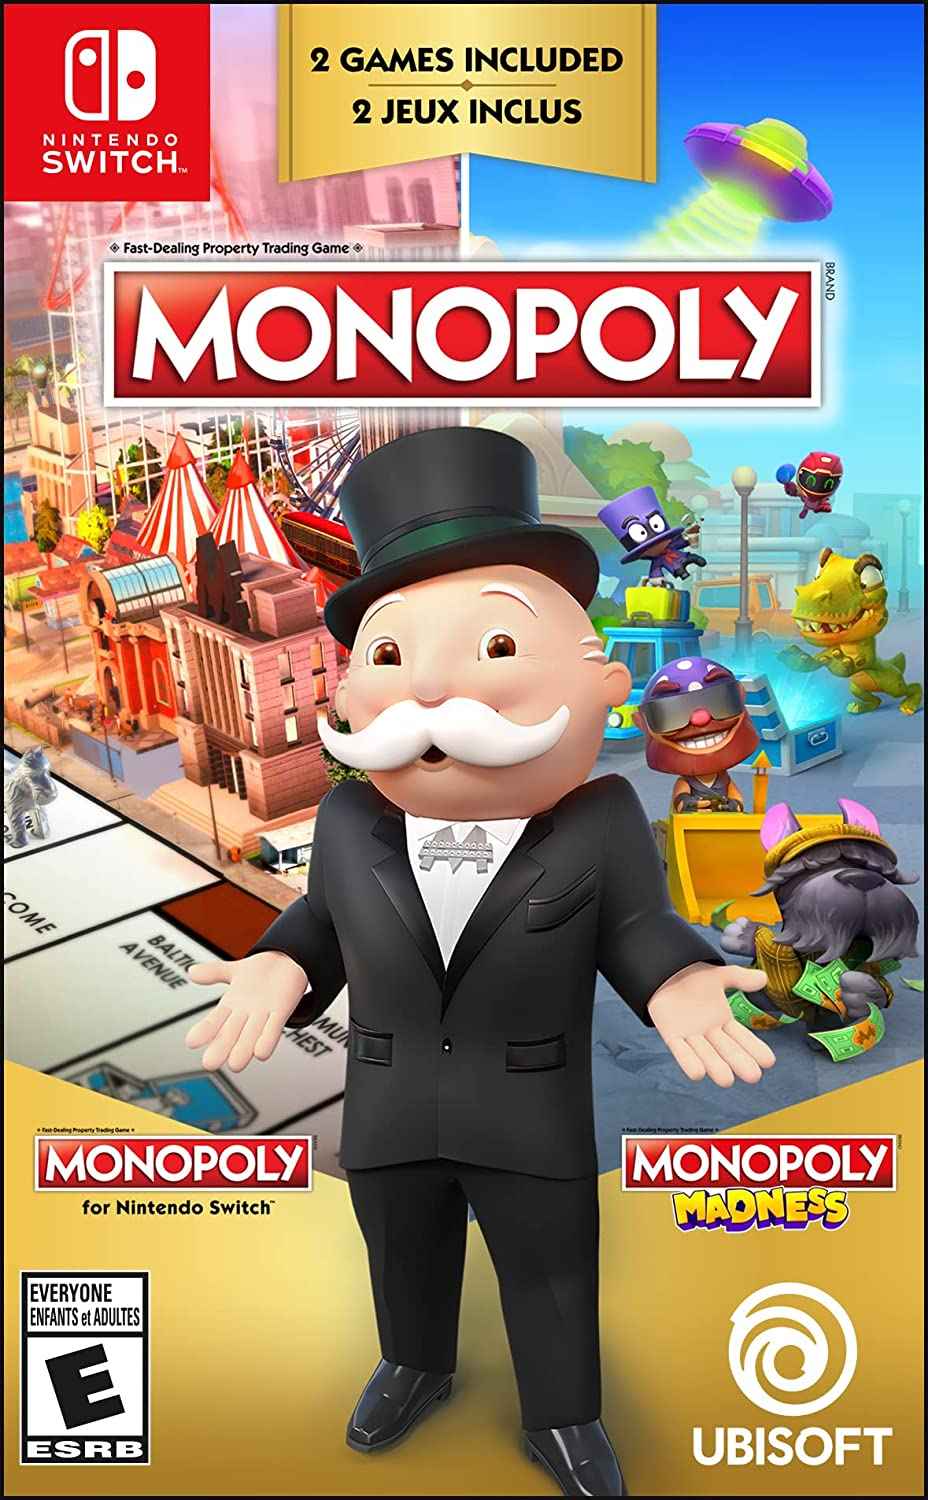 Amazon.com: MONOPOLY for Nintendo Switch + MONOPOLY Madness - Nintendo Switch, Nintendo Switch Lite : Ubisoft: Everything Else $24.99